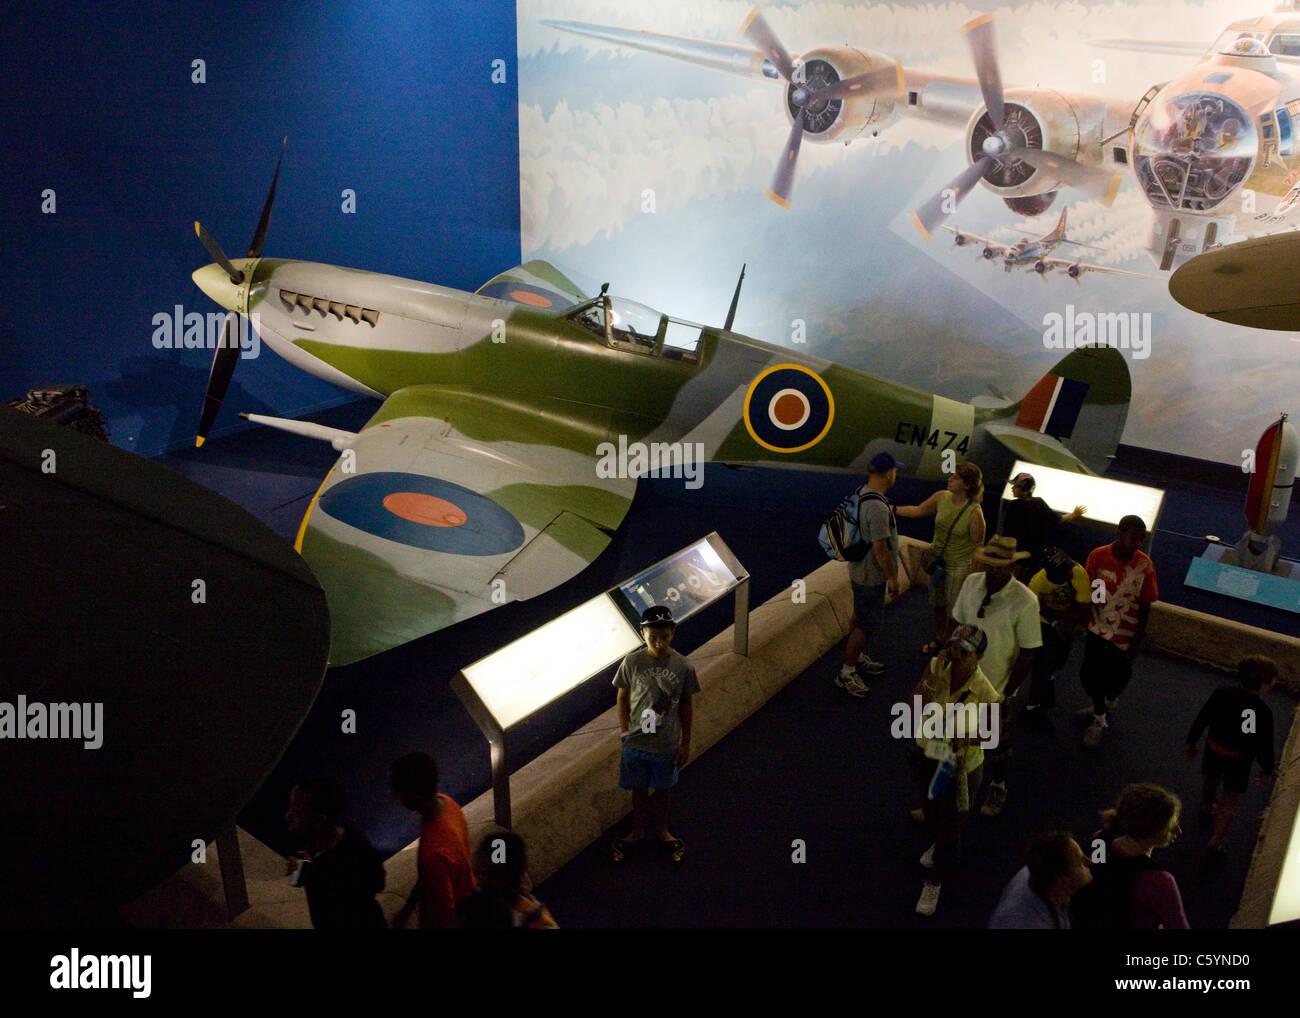 Visitors view a WWII-era British fighter aircraft, The Supermarine Spitfire - National Air and Space Museum - Washington, DC USA Stock Photo